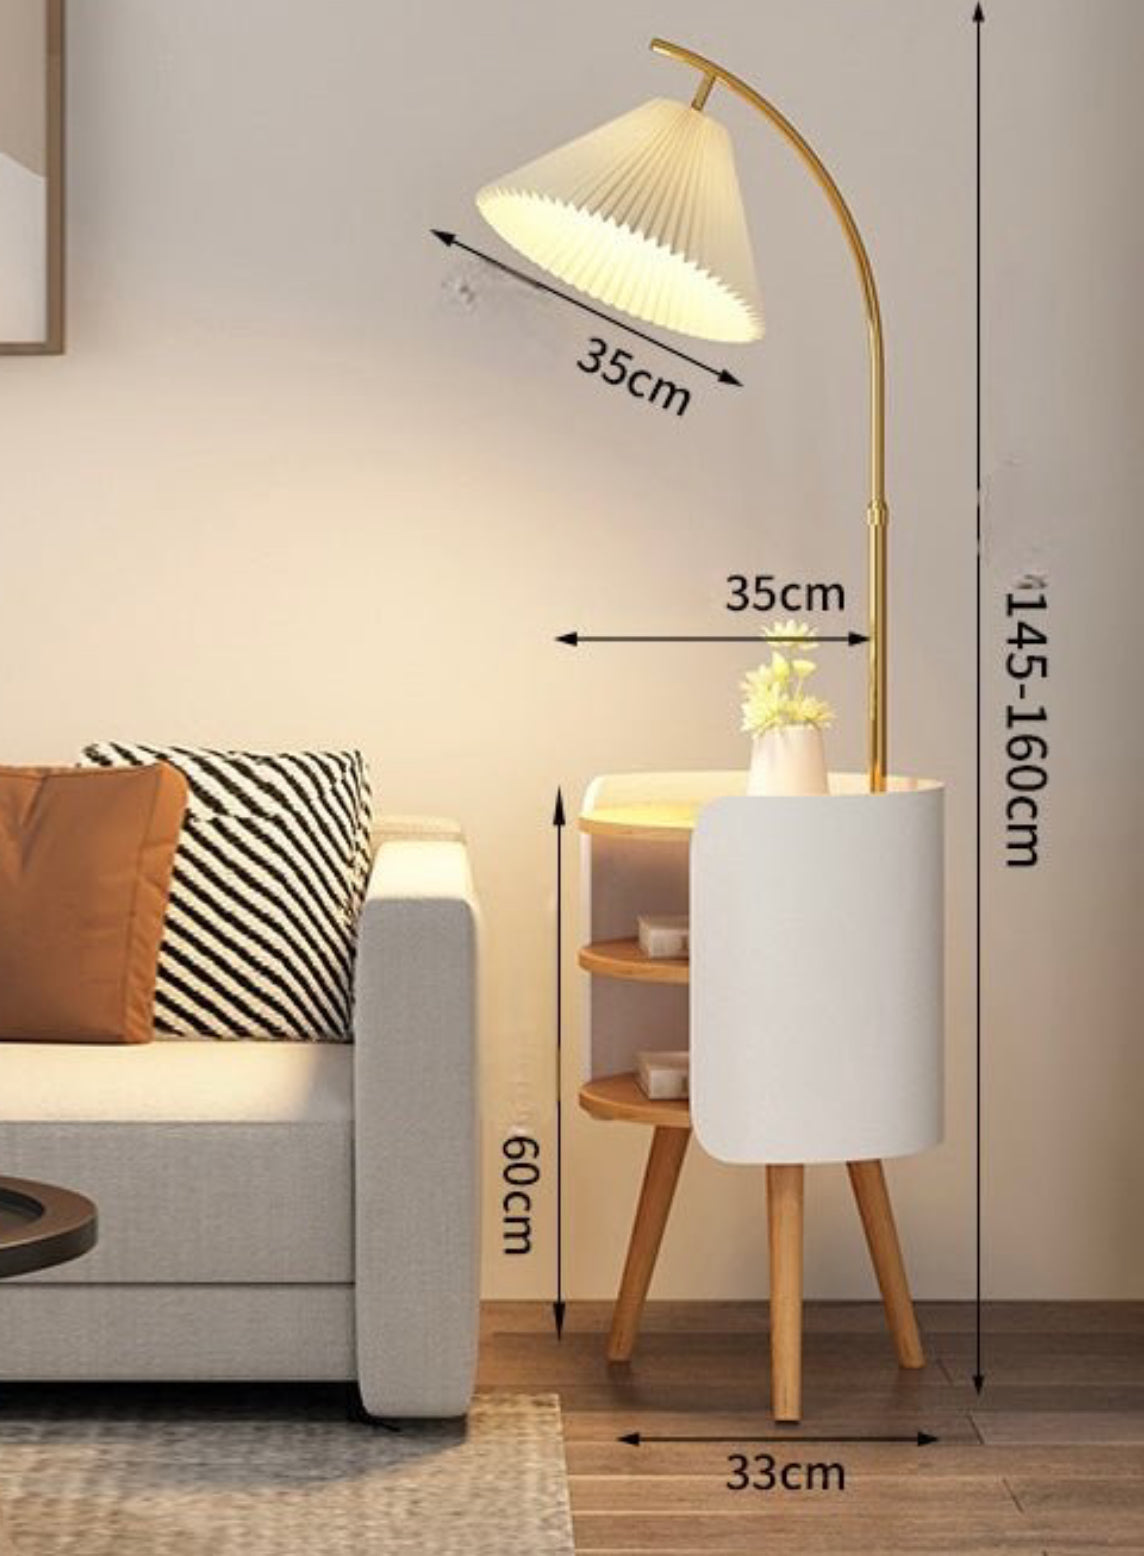 Said table with floor lamp